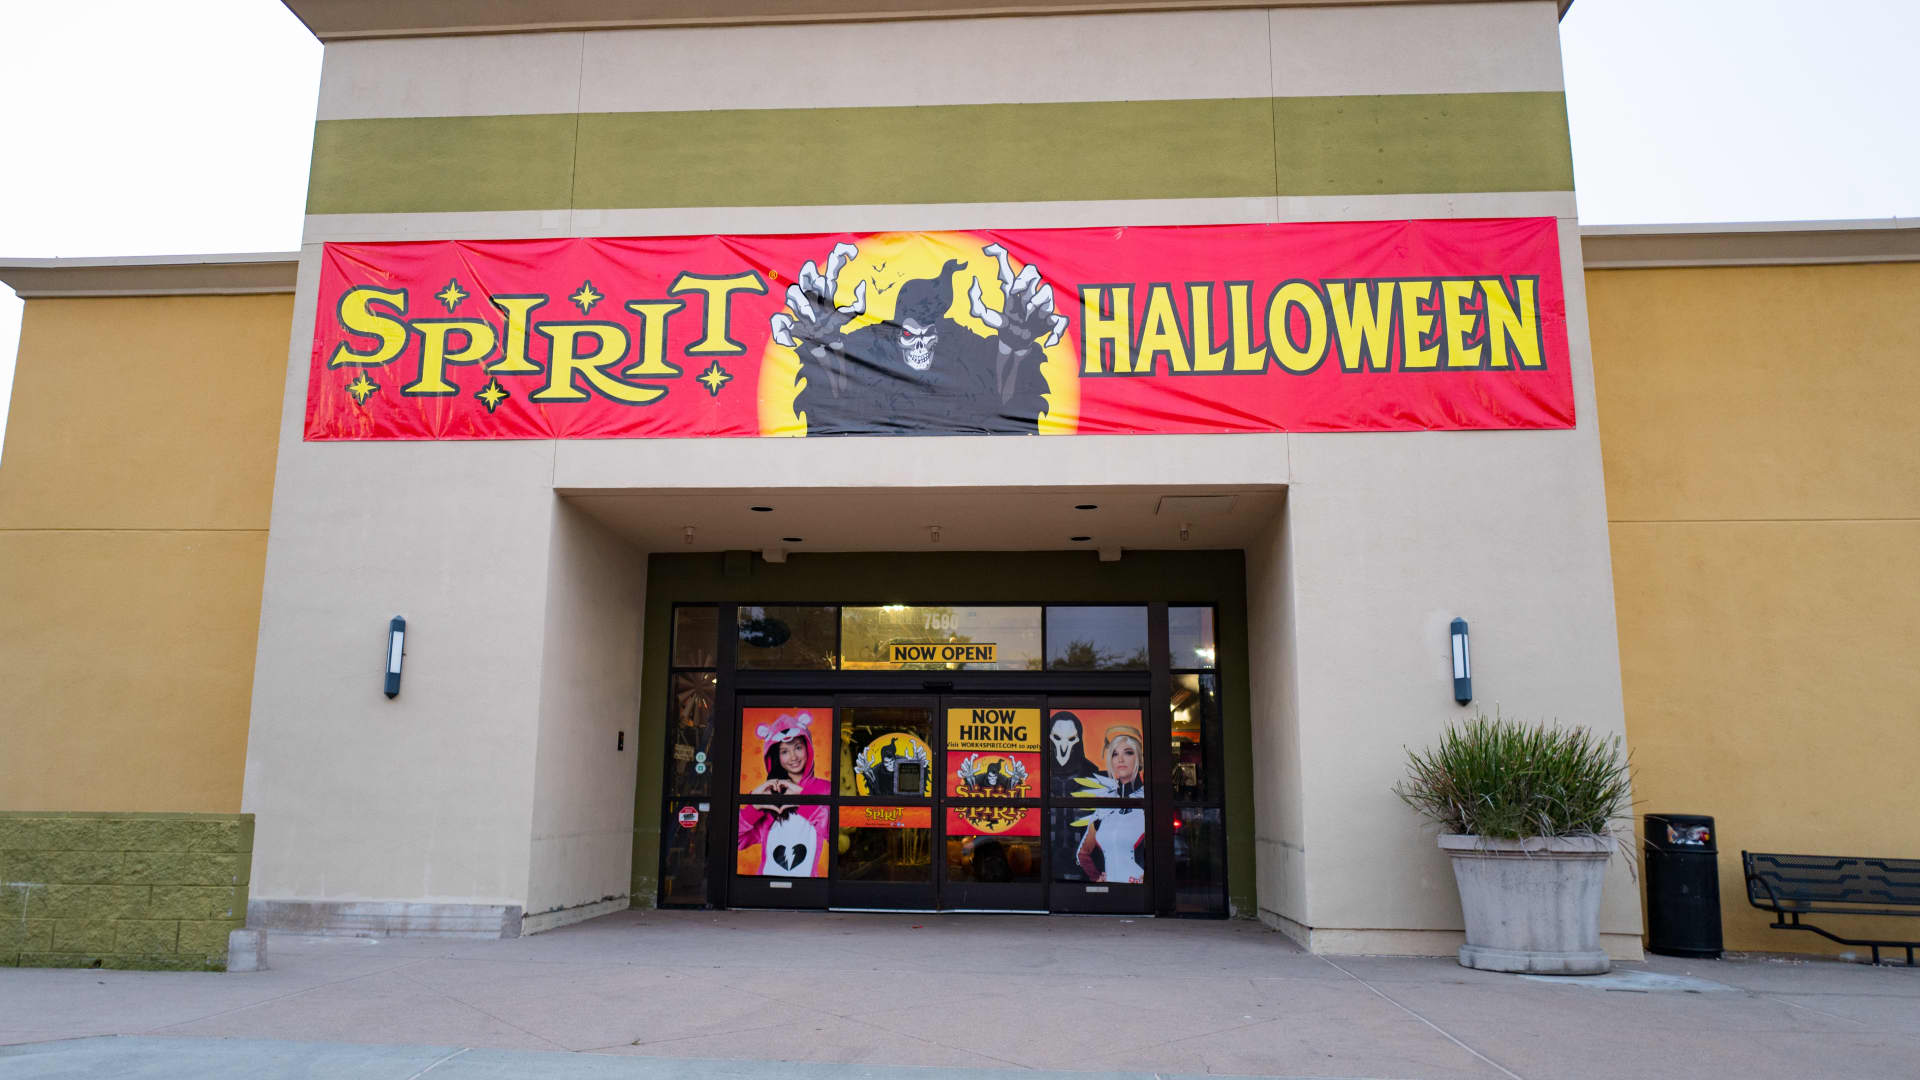 Spirit Halloween lives on when holiday ends